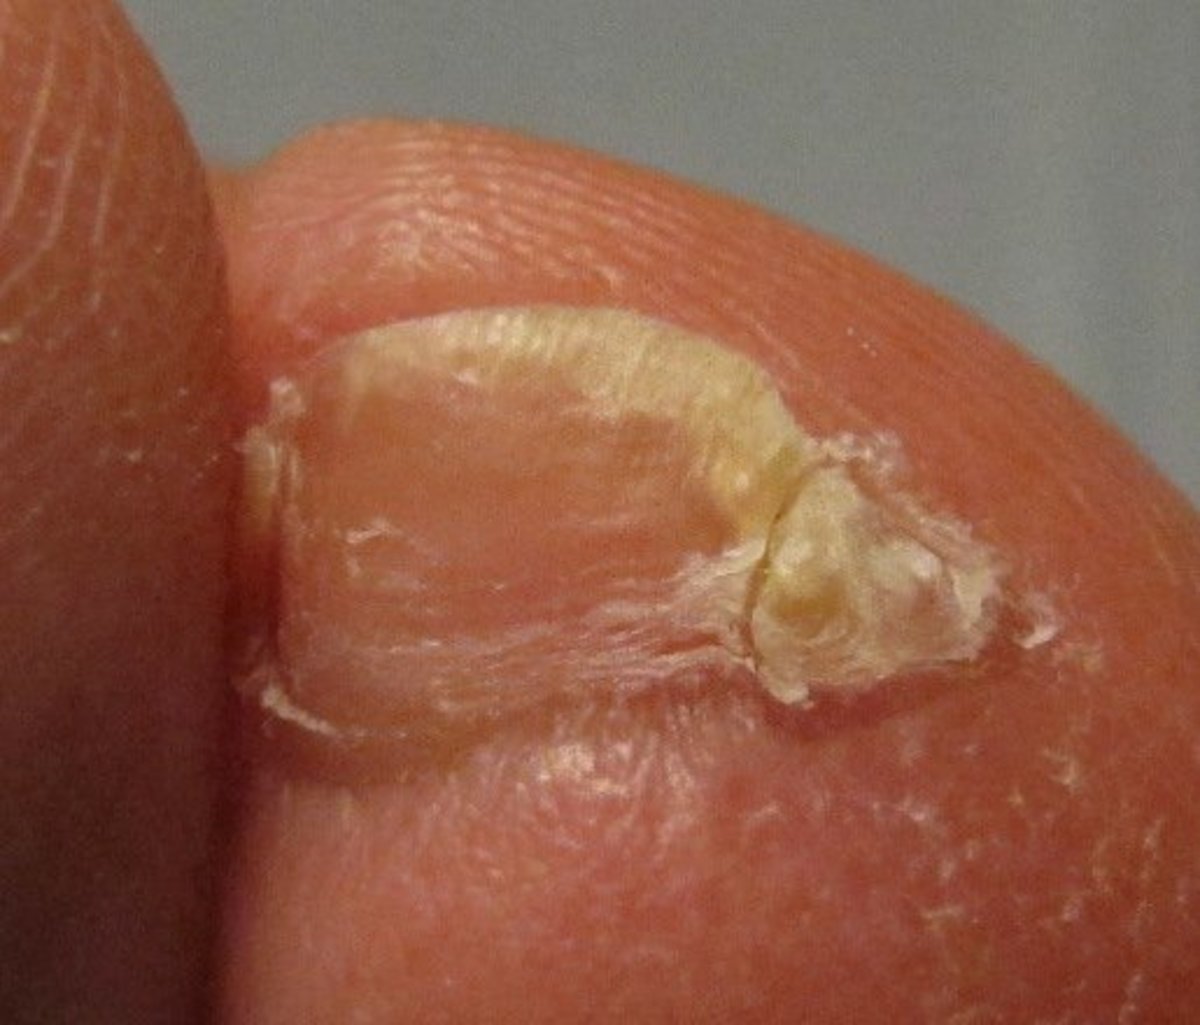 My Split Little Toenails (or Accessory Nail on the 5th Toe) - RemedyGrove